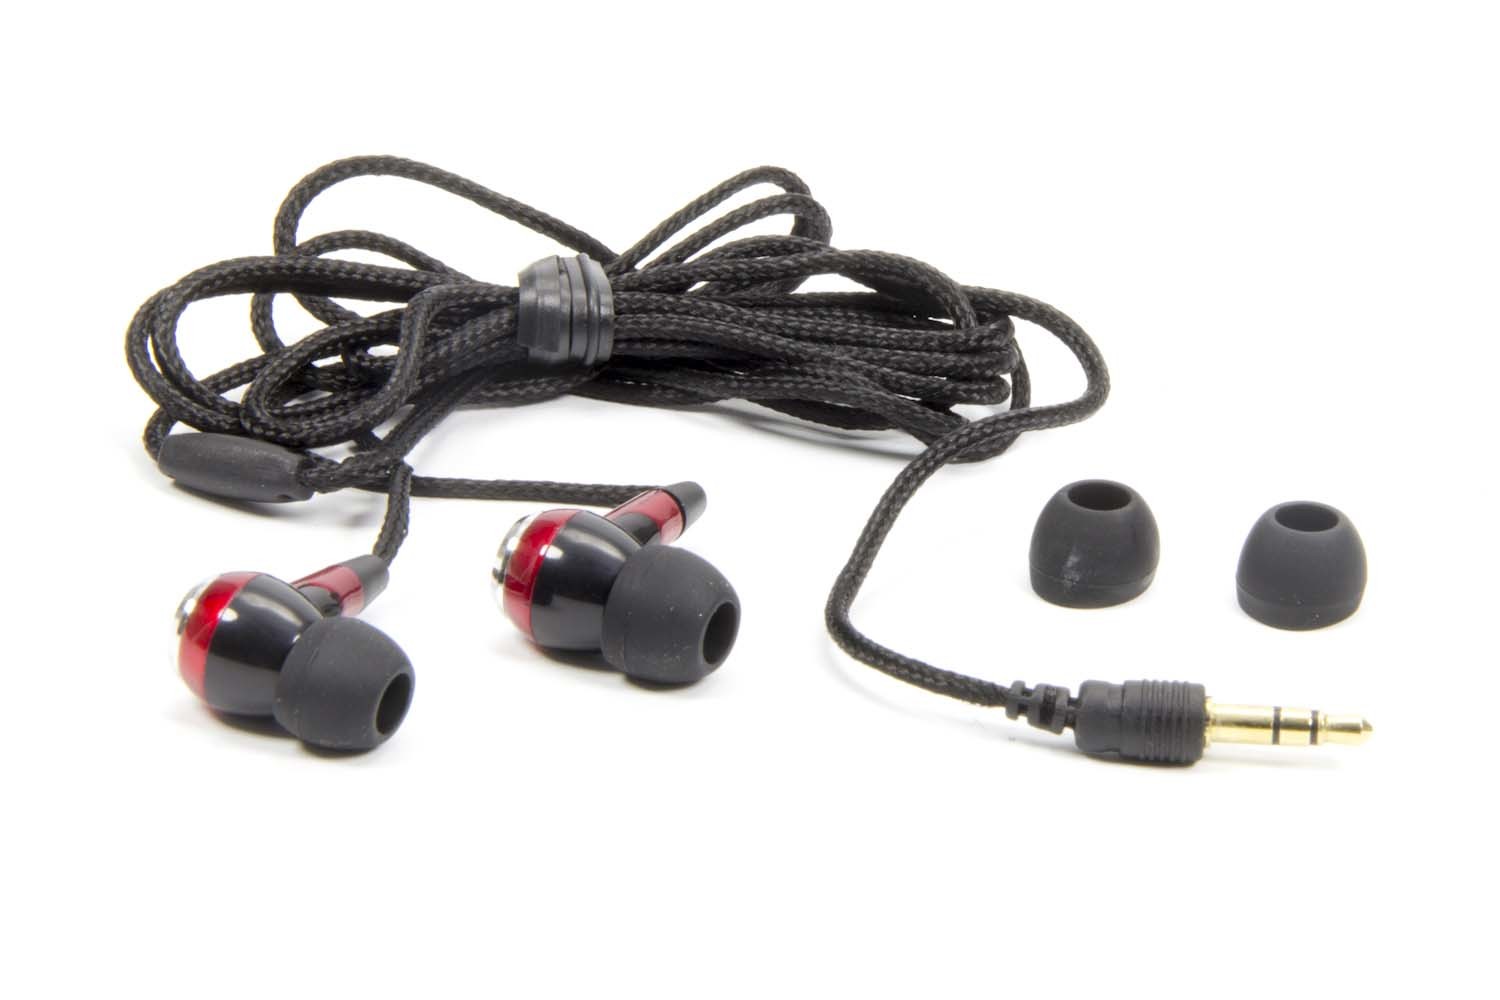 Raceceiver EP900R - Headphones, Rookie, 48 in Cord, 3.5 mm Input Jack, Small / Medium / Large Rubber Ear Inserts, Each